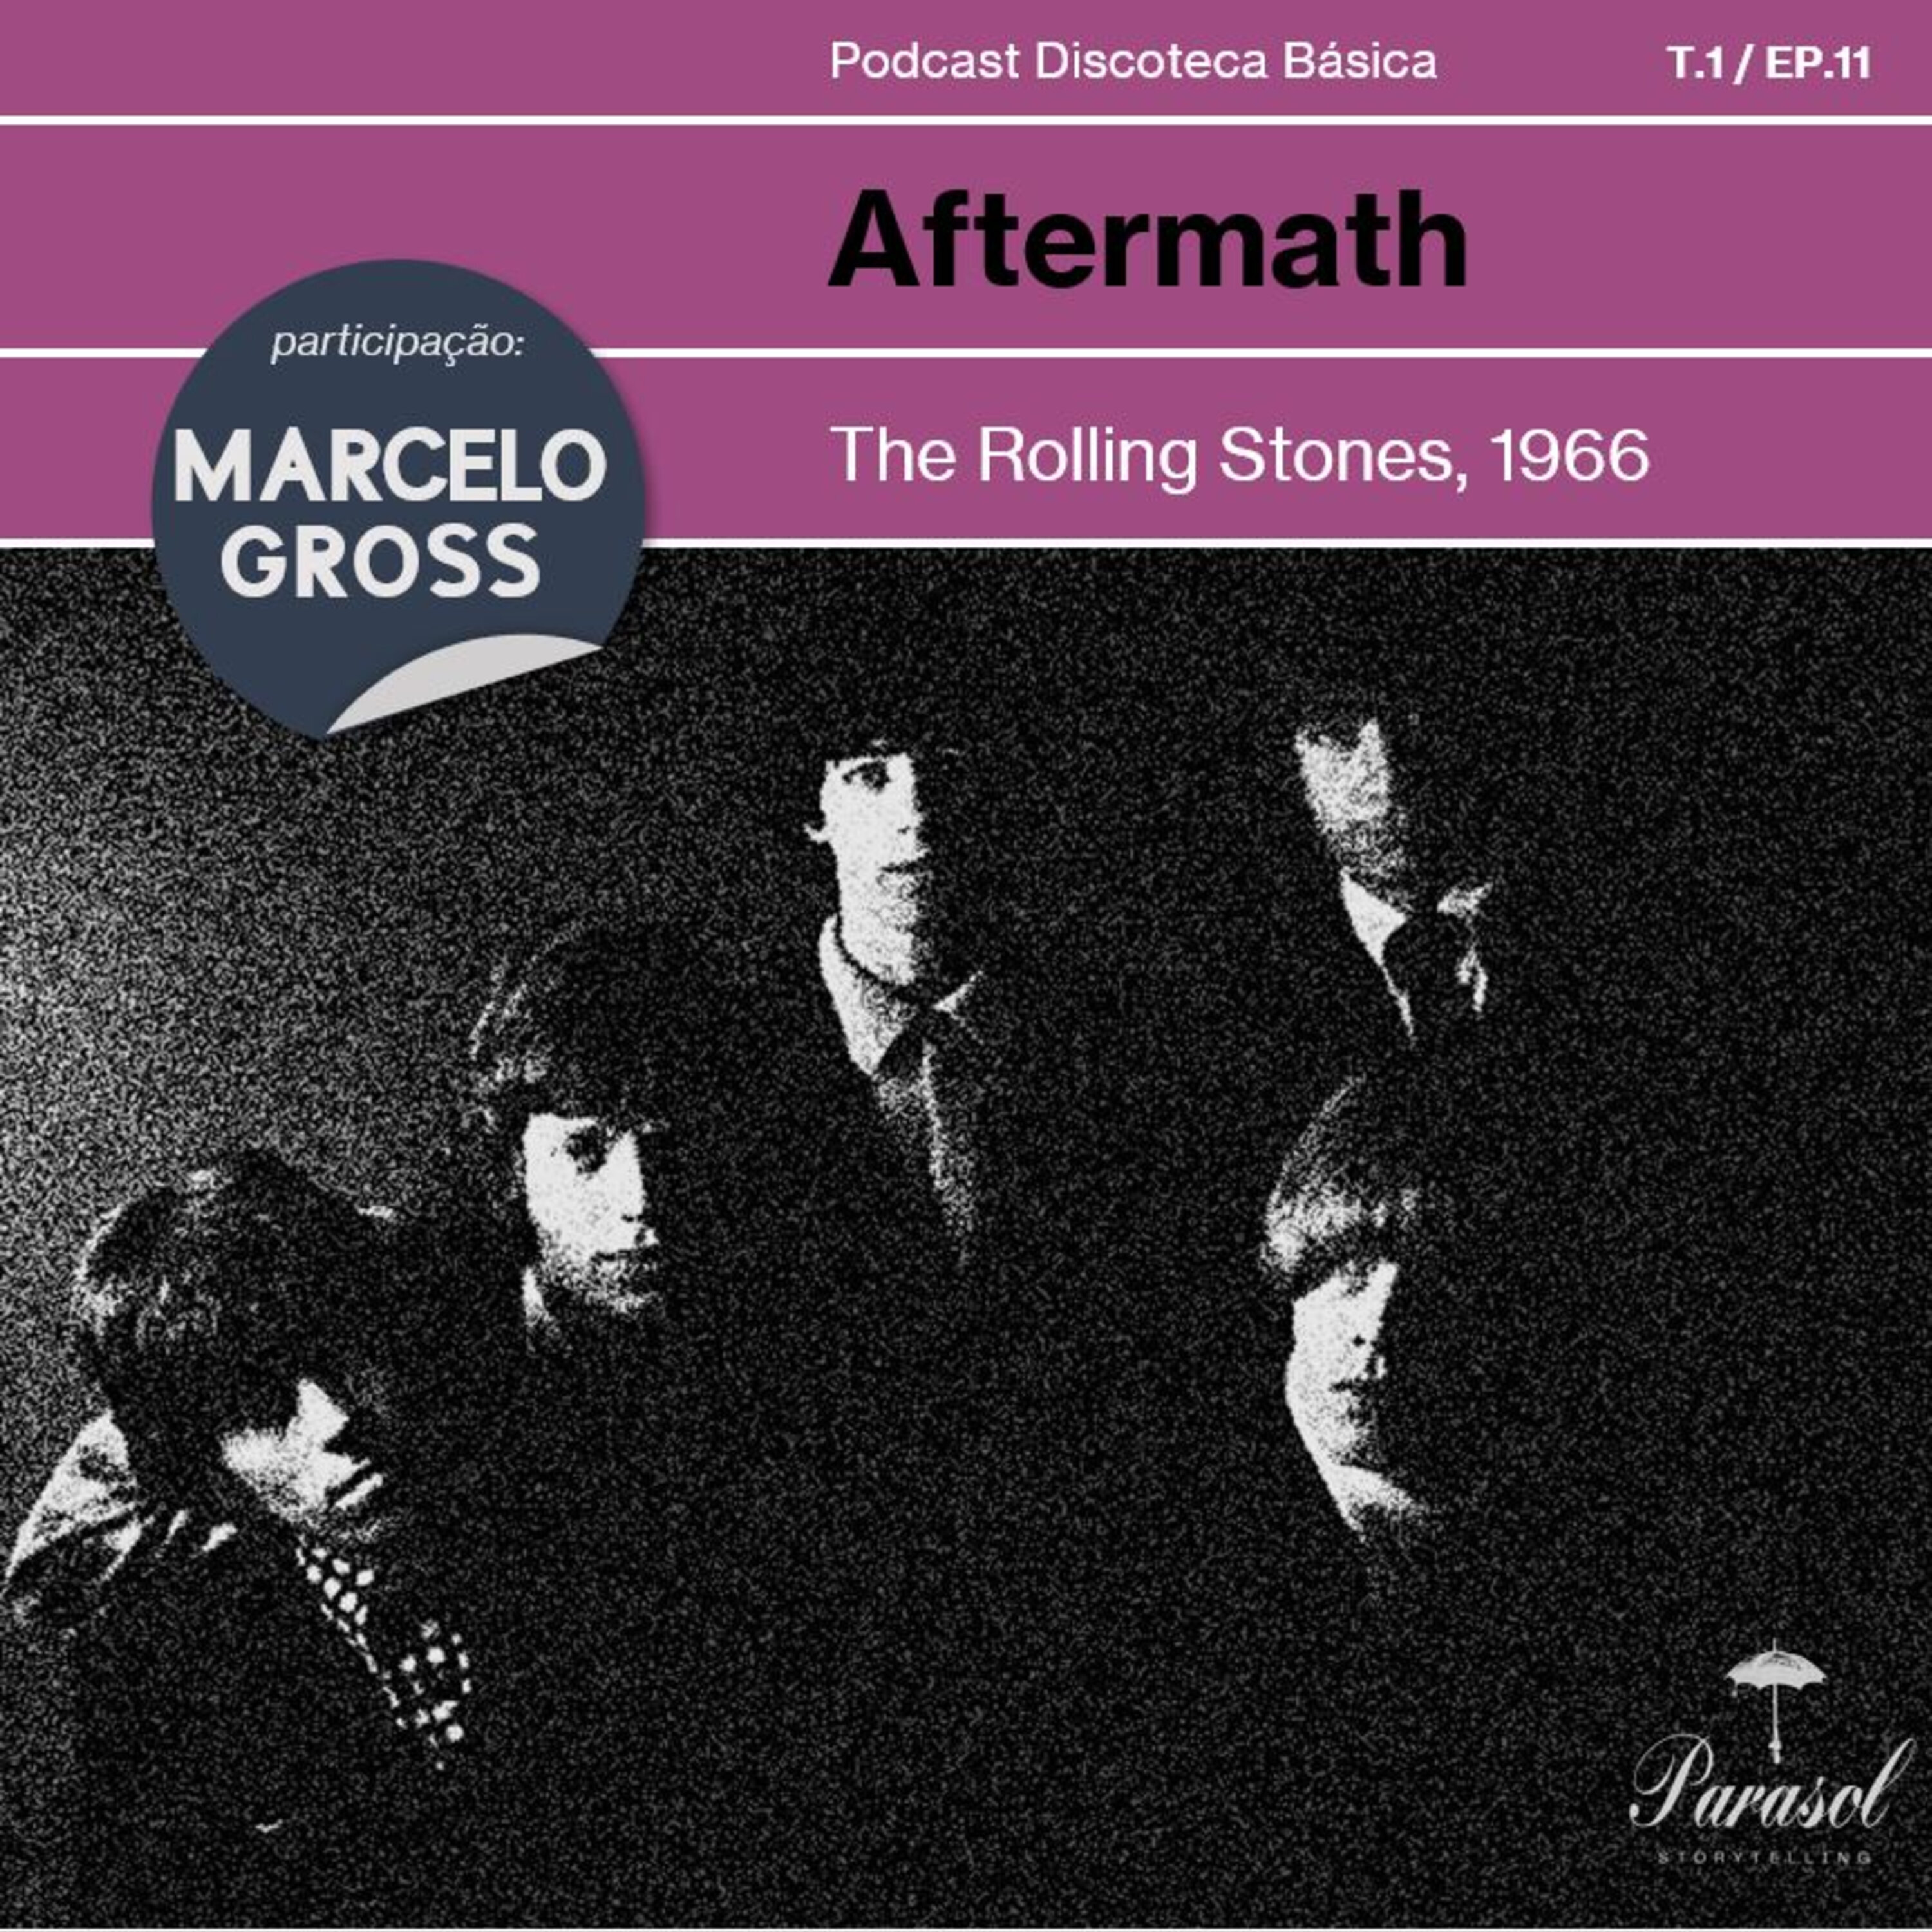 T01E11: Aftermath - The Rolling Stones (1966)